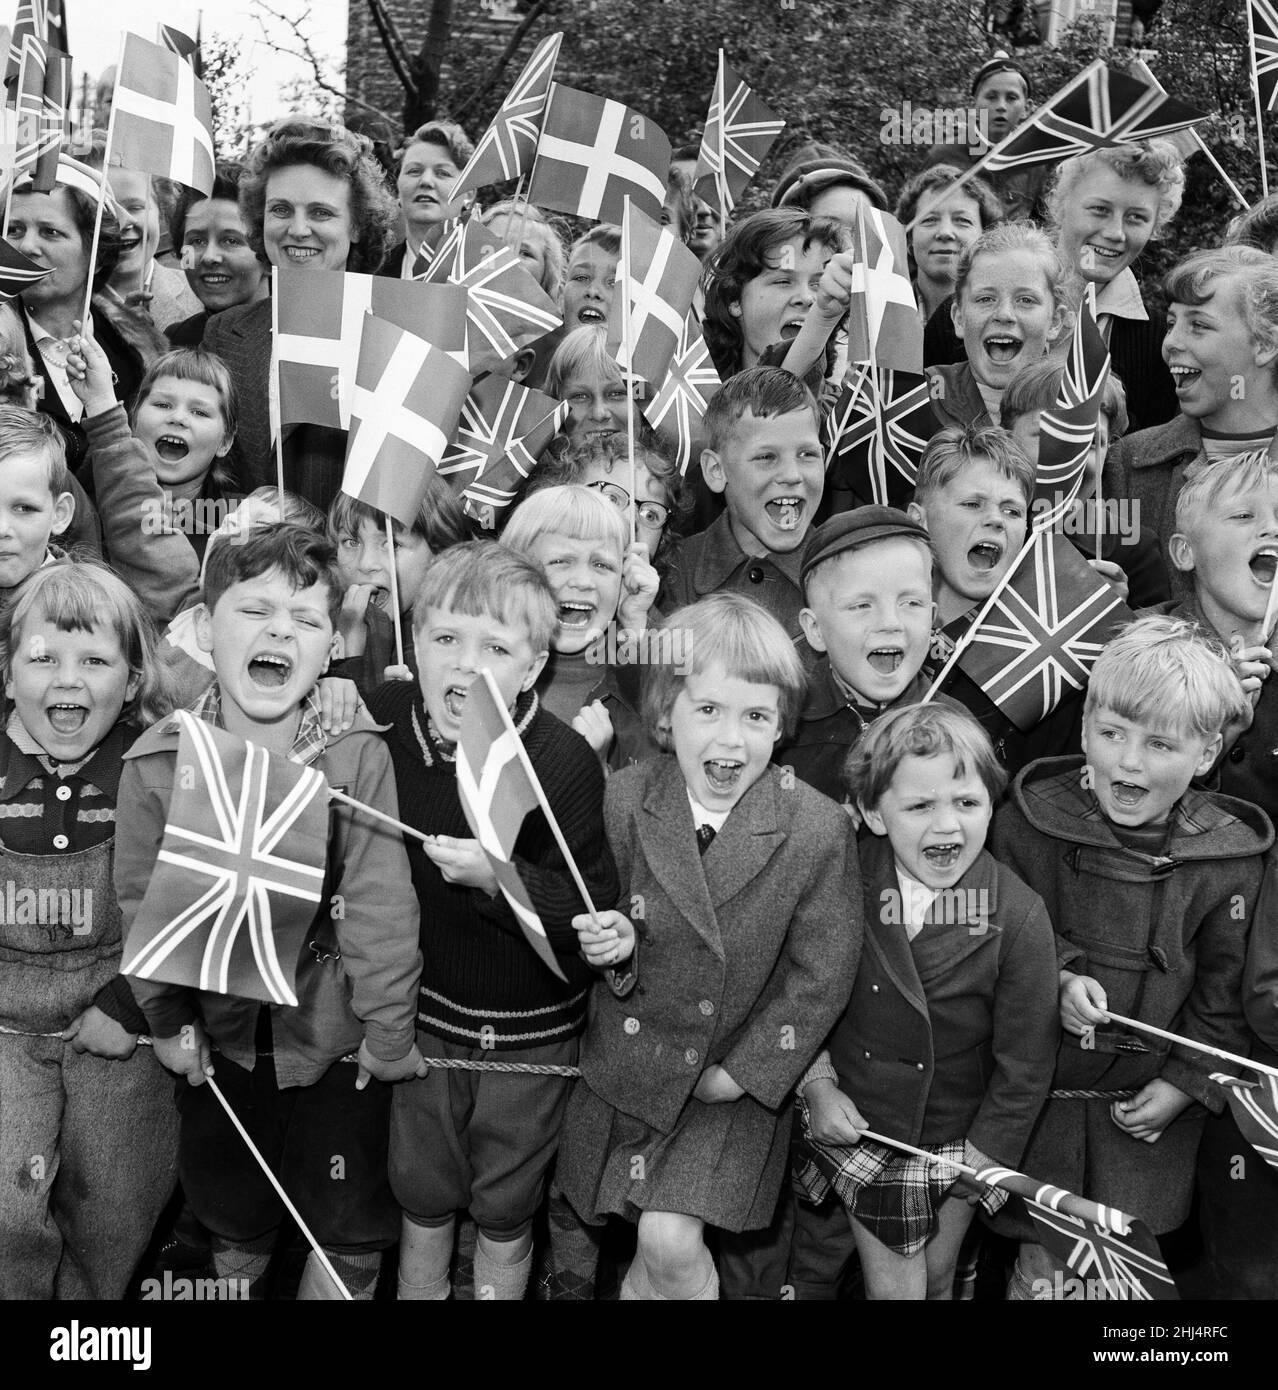 Queen Elizabeth II and Prince Philip, Duke of Edinburgh visit to Denmark. Children with Union Jack flags and Danish flags cheer when Queen Elizabeth II and Prince Philip visit the recreation centre. 22nd May 1957. Stock Photo